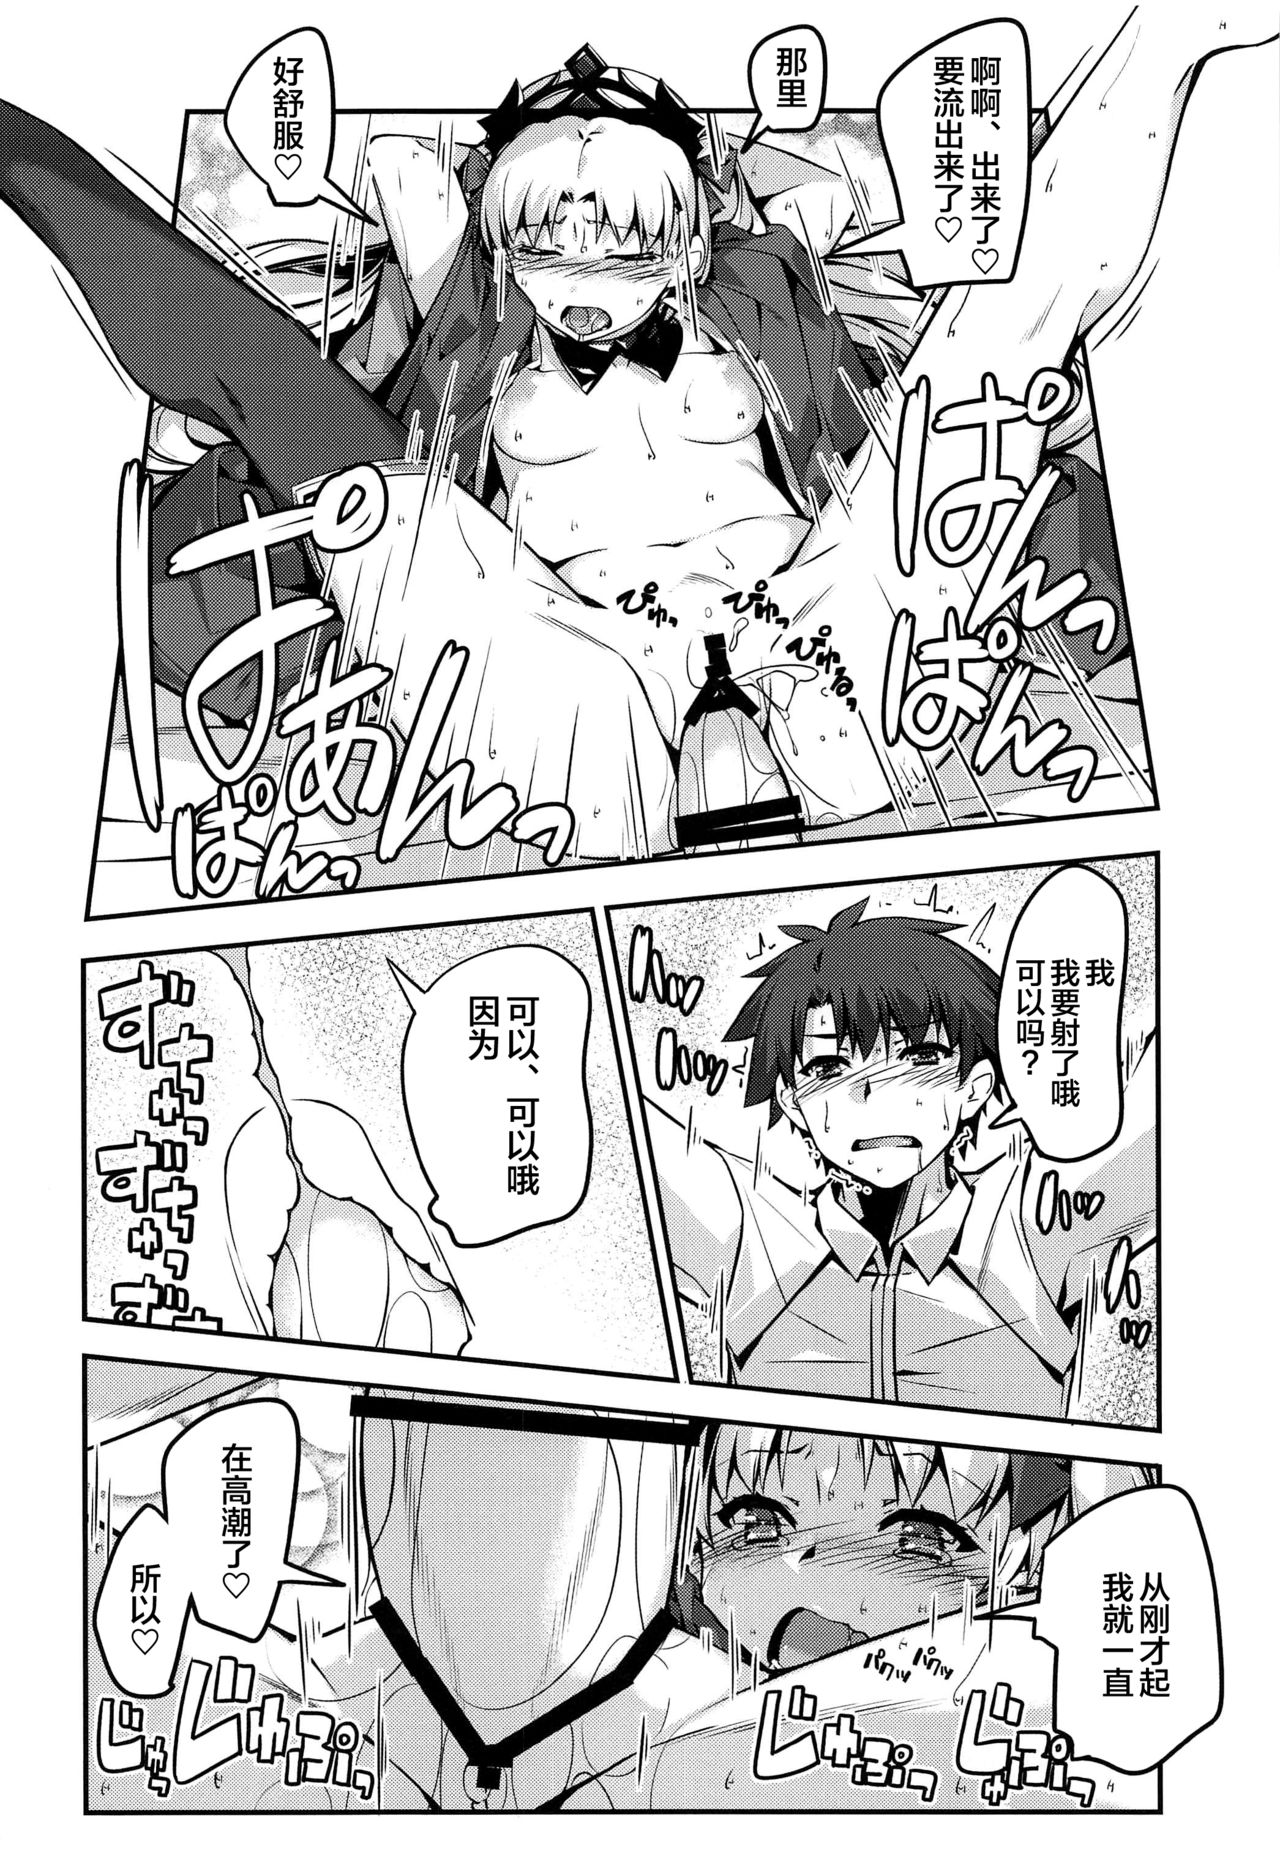 (C97) [Kansyouyou Marmotte (Mr.Lostman)] Hiroigui. (Fate/Grand Order) [Chinese] [黎欧×新桥月白日语社] page 17 full